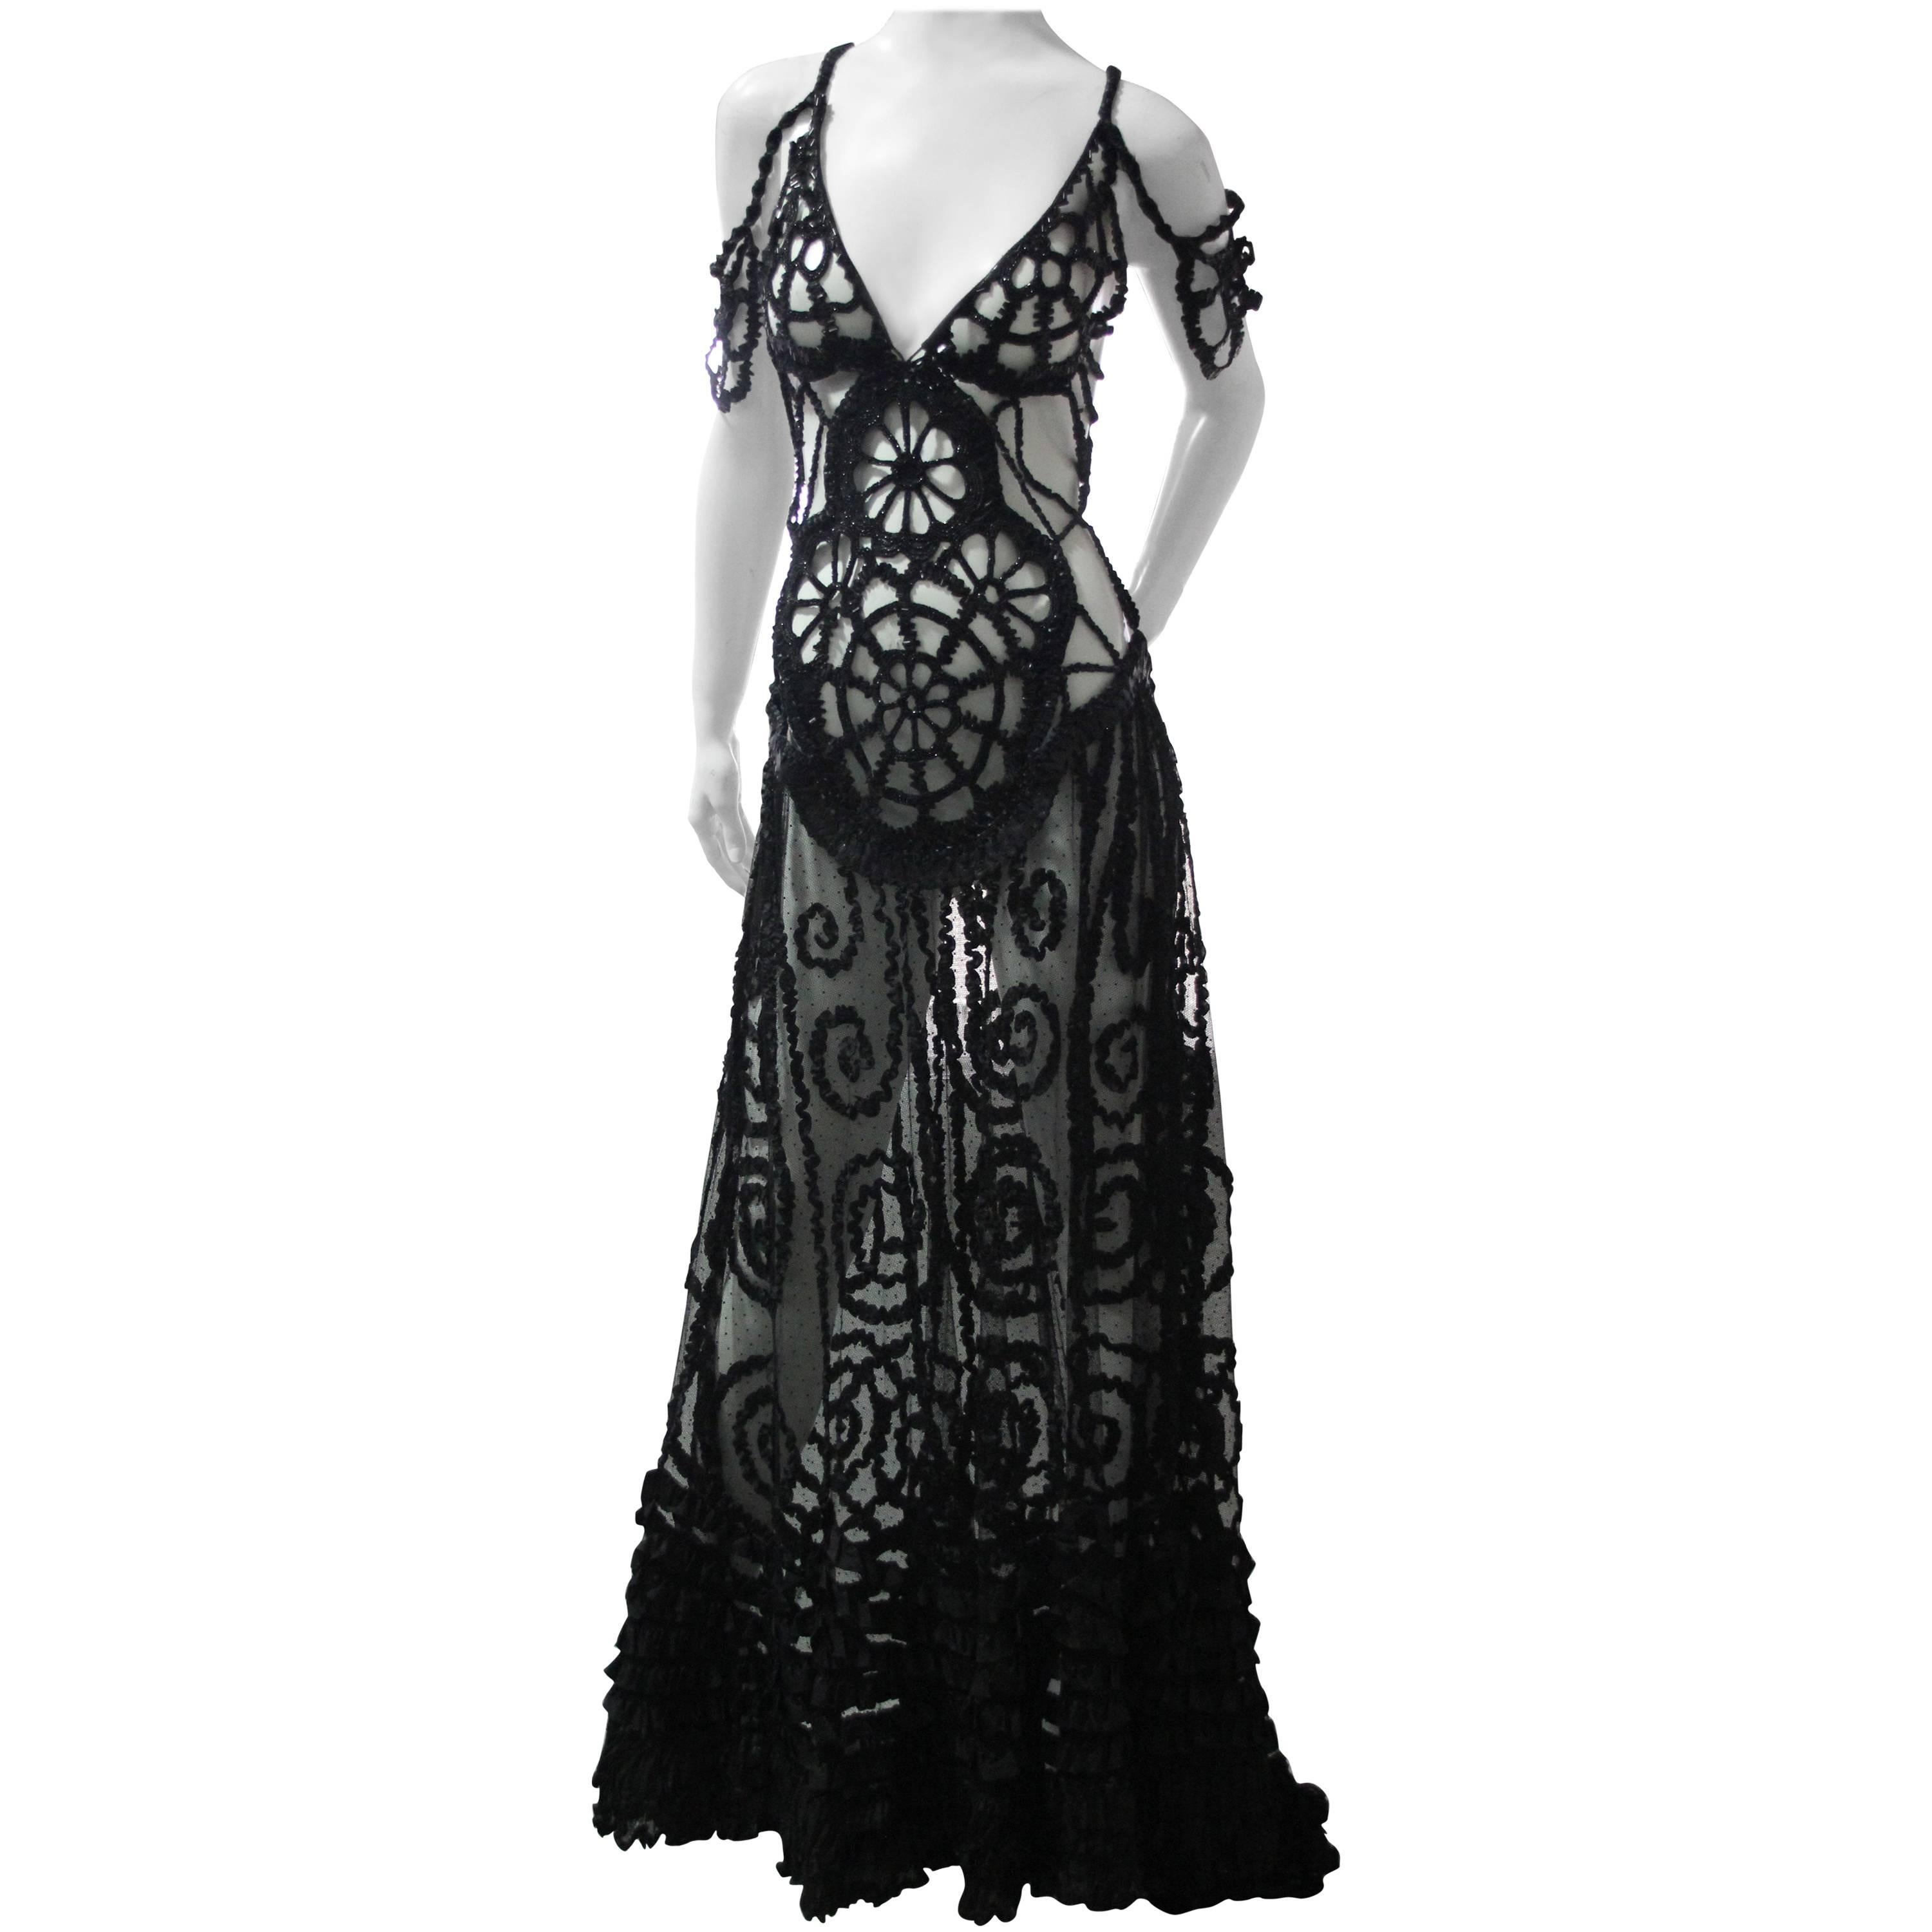 Black Widow Peek-a-Boo Gown in Tulle Victorian Beadwork Ruffles and Leather